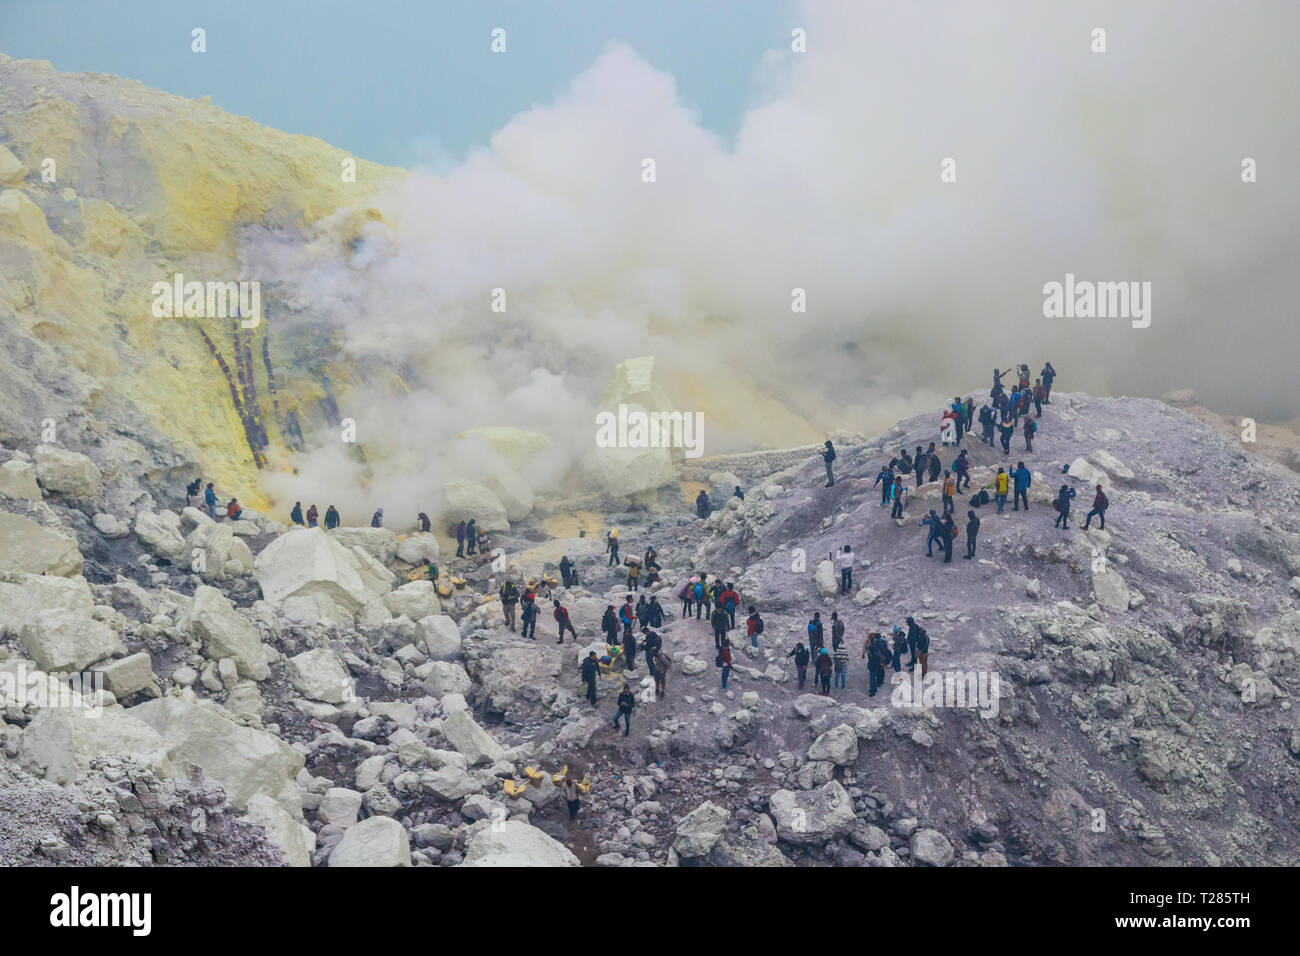 View of the Kawah Ijen crater  and crowded with tourists and with toxic sulferic gases emerging from the bottom. Java, Indonesia. Stock Photo